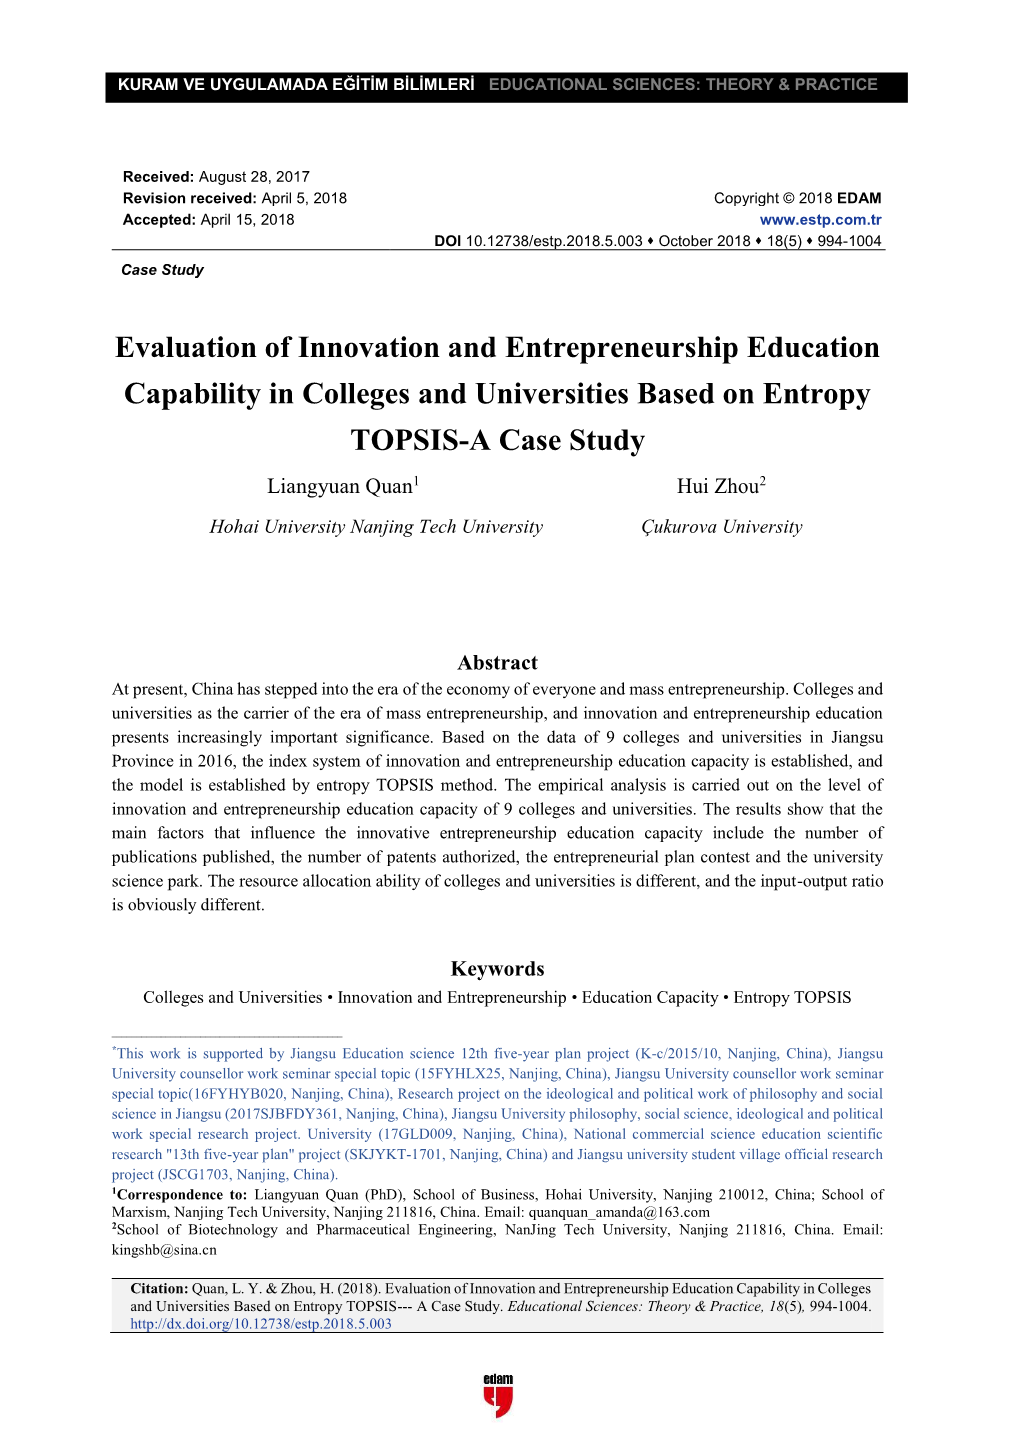 Evaluation of Innovation and Entrepreneurship Education Capability in Colleges and Universities Based on Entropy TOPSIS-A Case Study